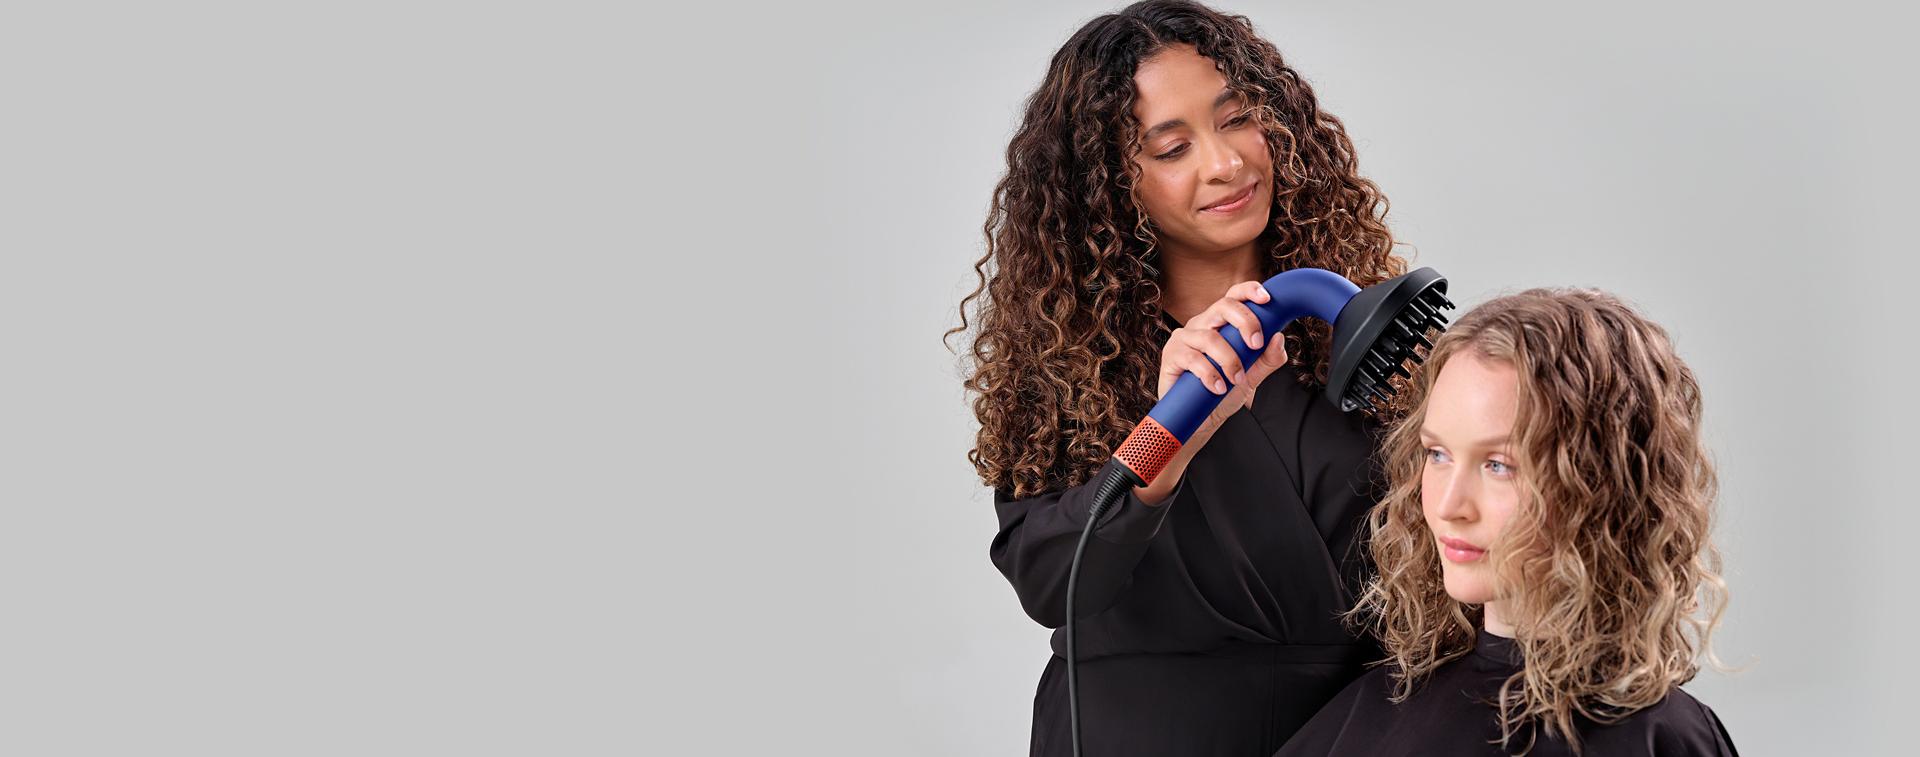 Dyson Supersonic r Professional hair dryer is used on a model to dry hair.